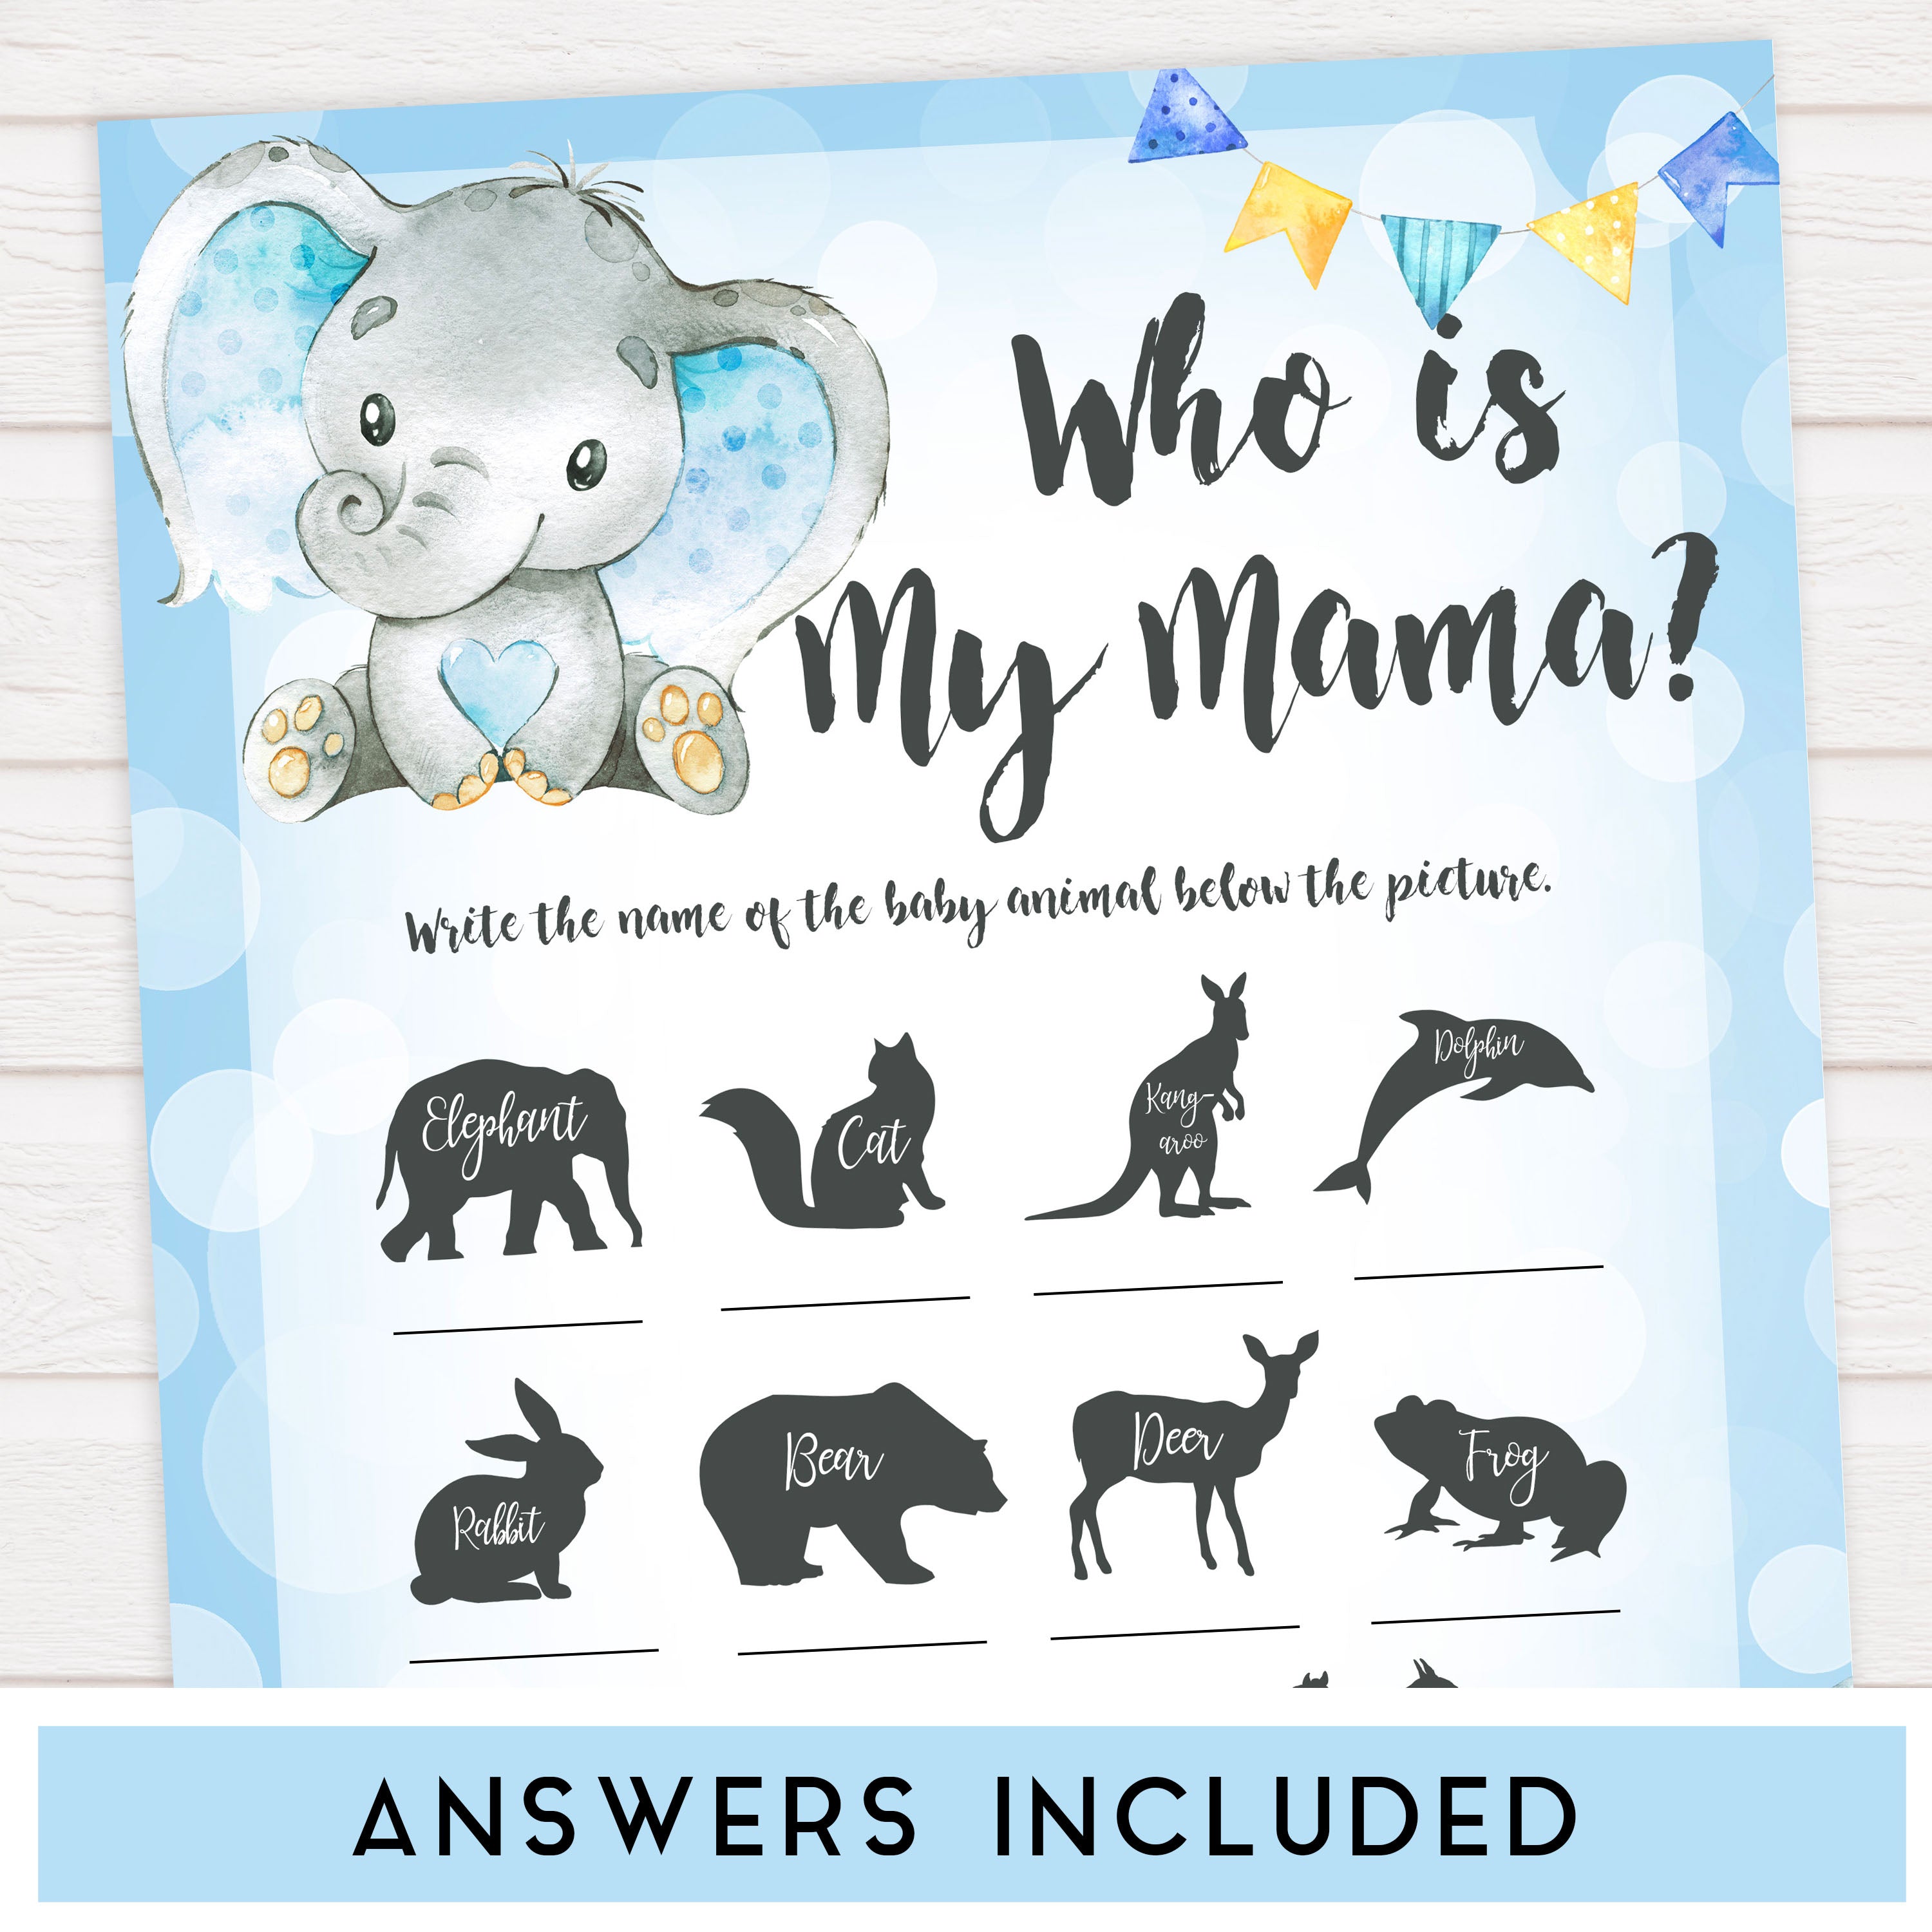 Blue elephant baby games, who is my mama, elephant baby games, printable baby games, top baby games, best baby shower games, baby shower ideas, fun baby games, elephant baby shower